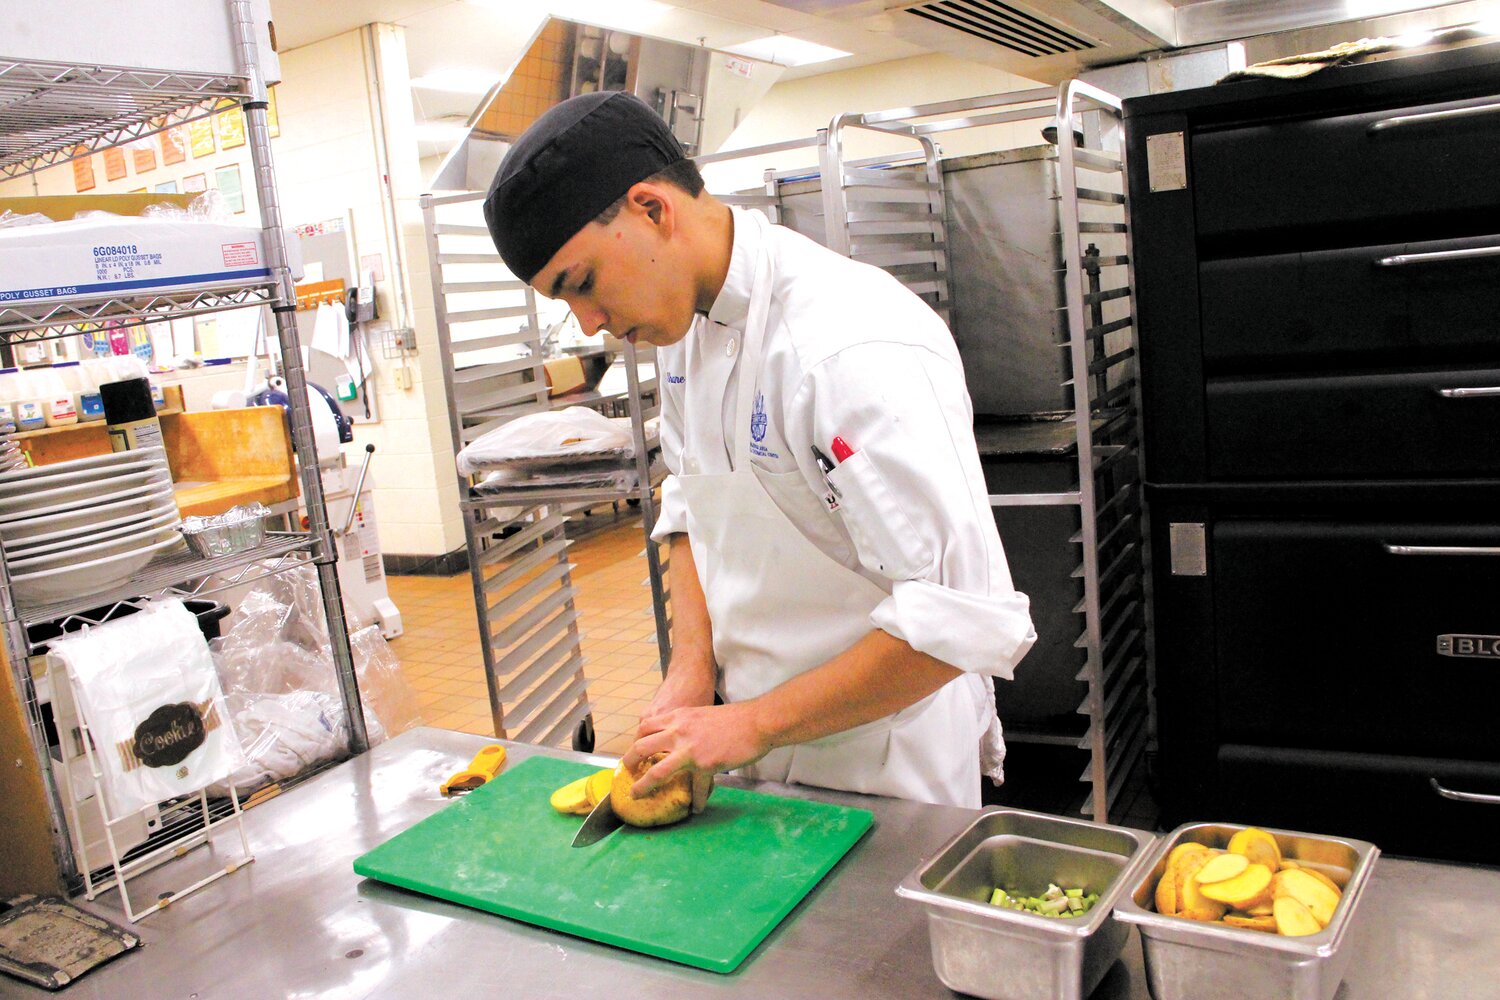 SLICED THIN: Warwick Area Career and Technology culinary student Shane Giroux cuts potatoes that were part of the school’s entry in the High School Seafood Cookoff held Thursday at the center. (Warwick Beacon Photos)